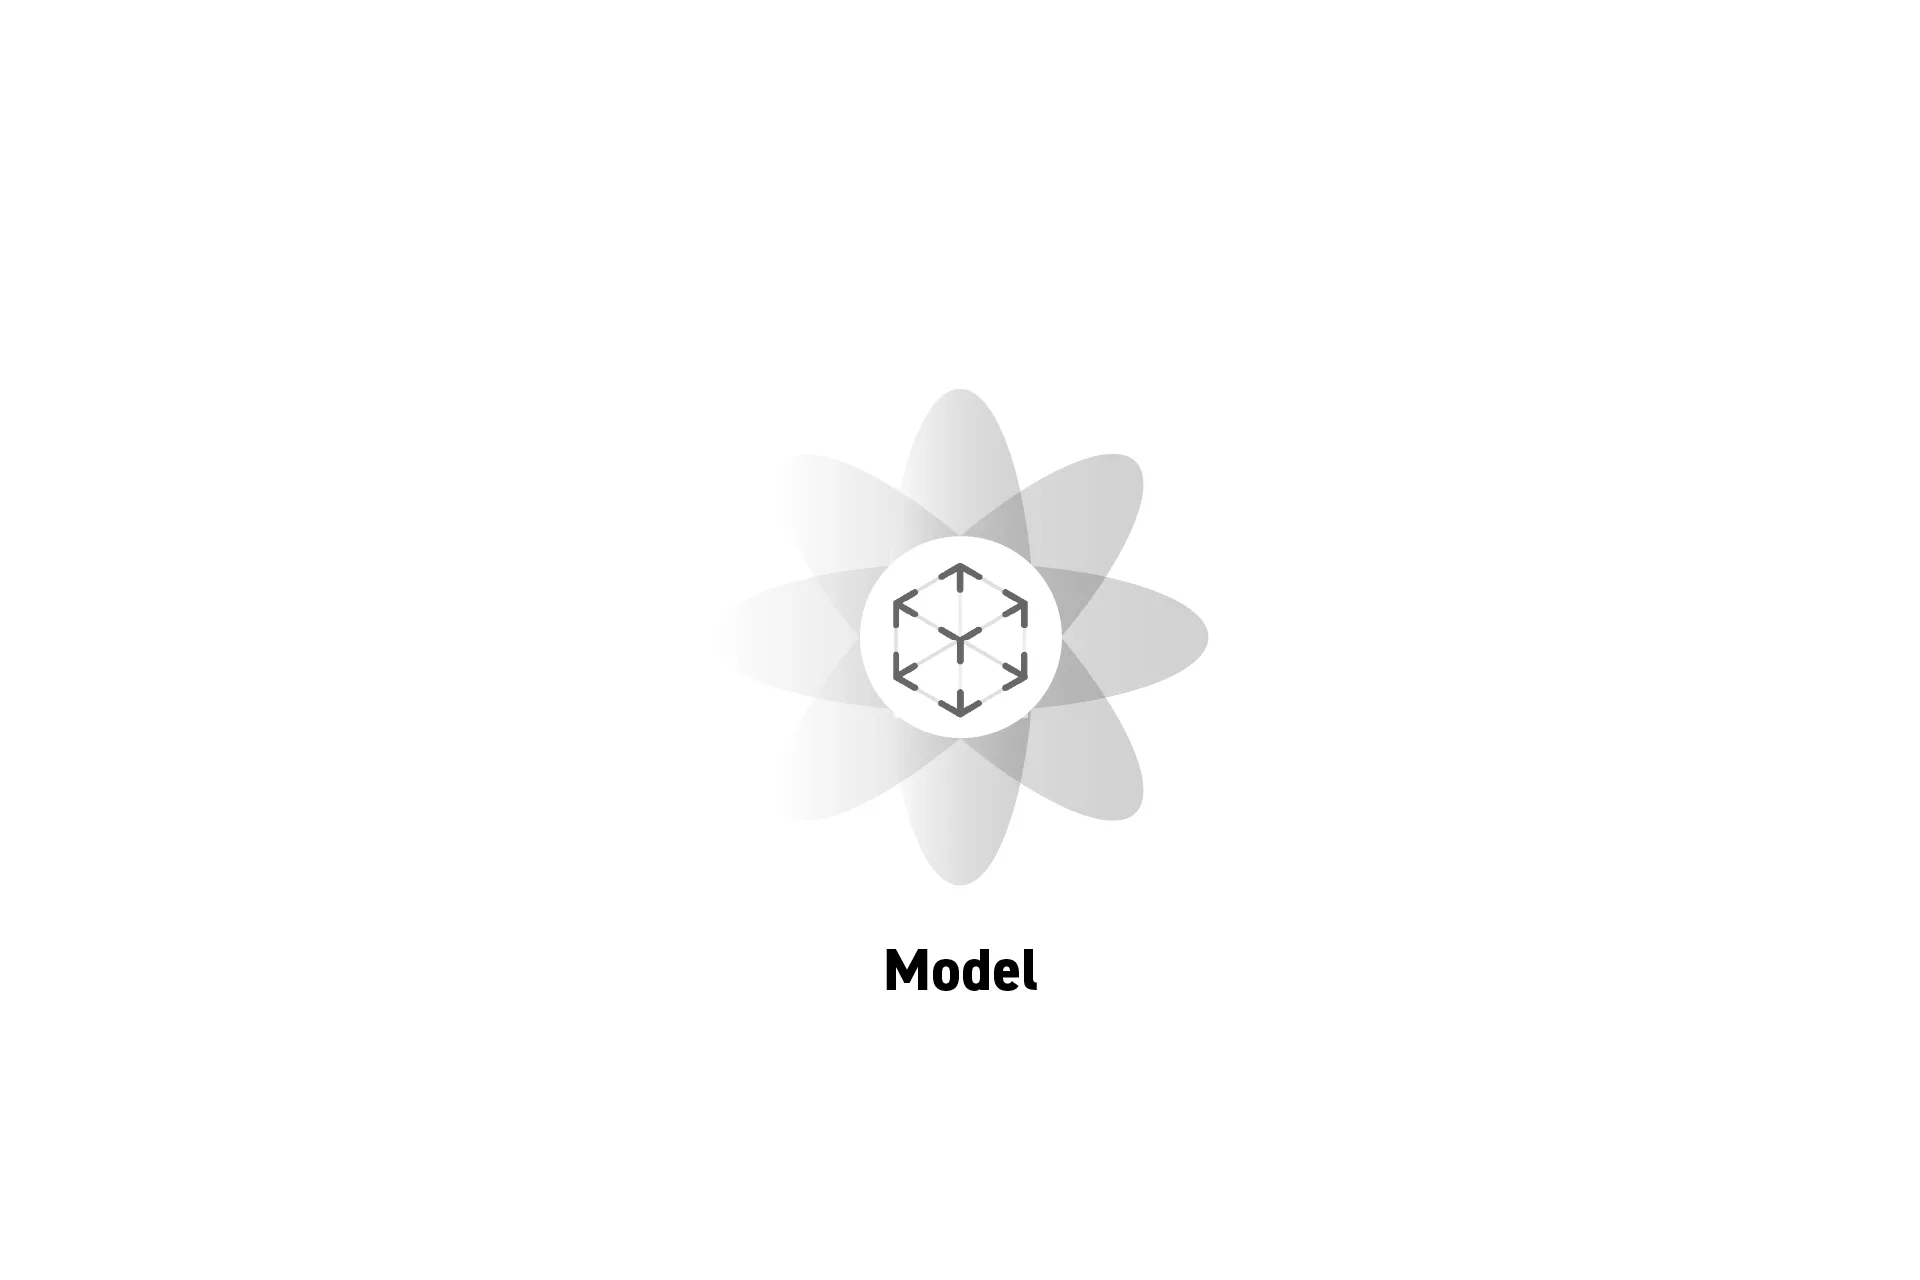 A flower that represents spatial computing with the text "Model" beneath it.